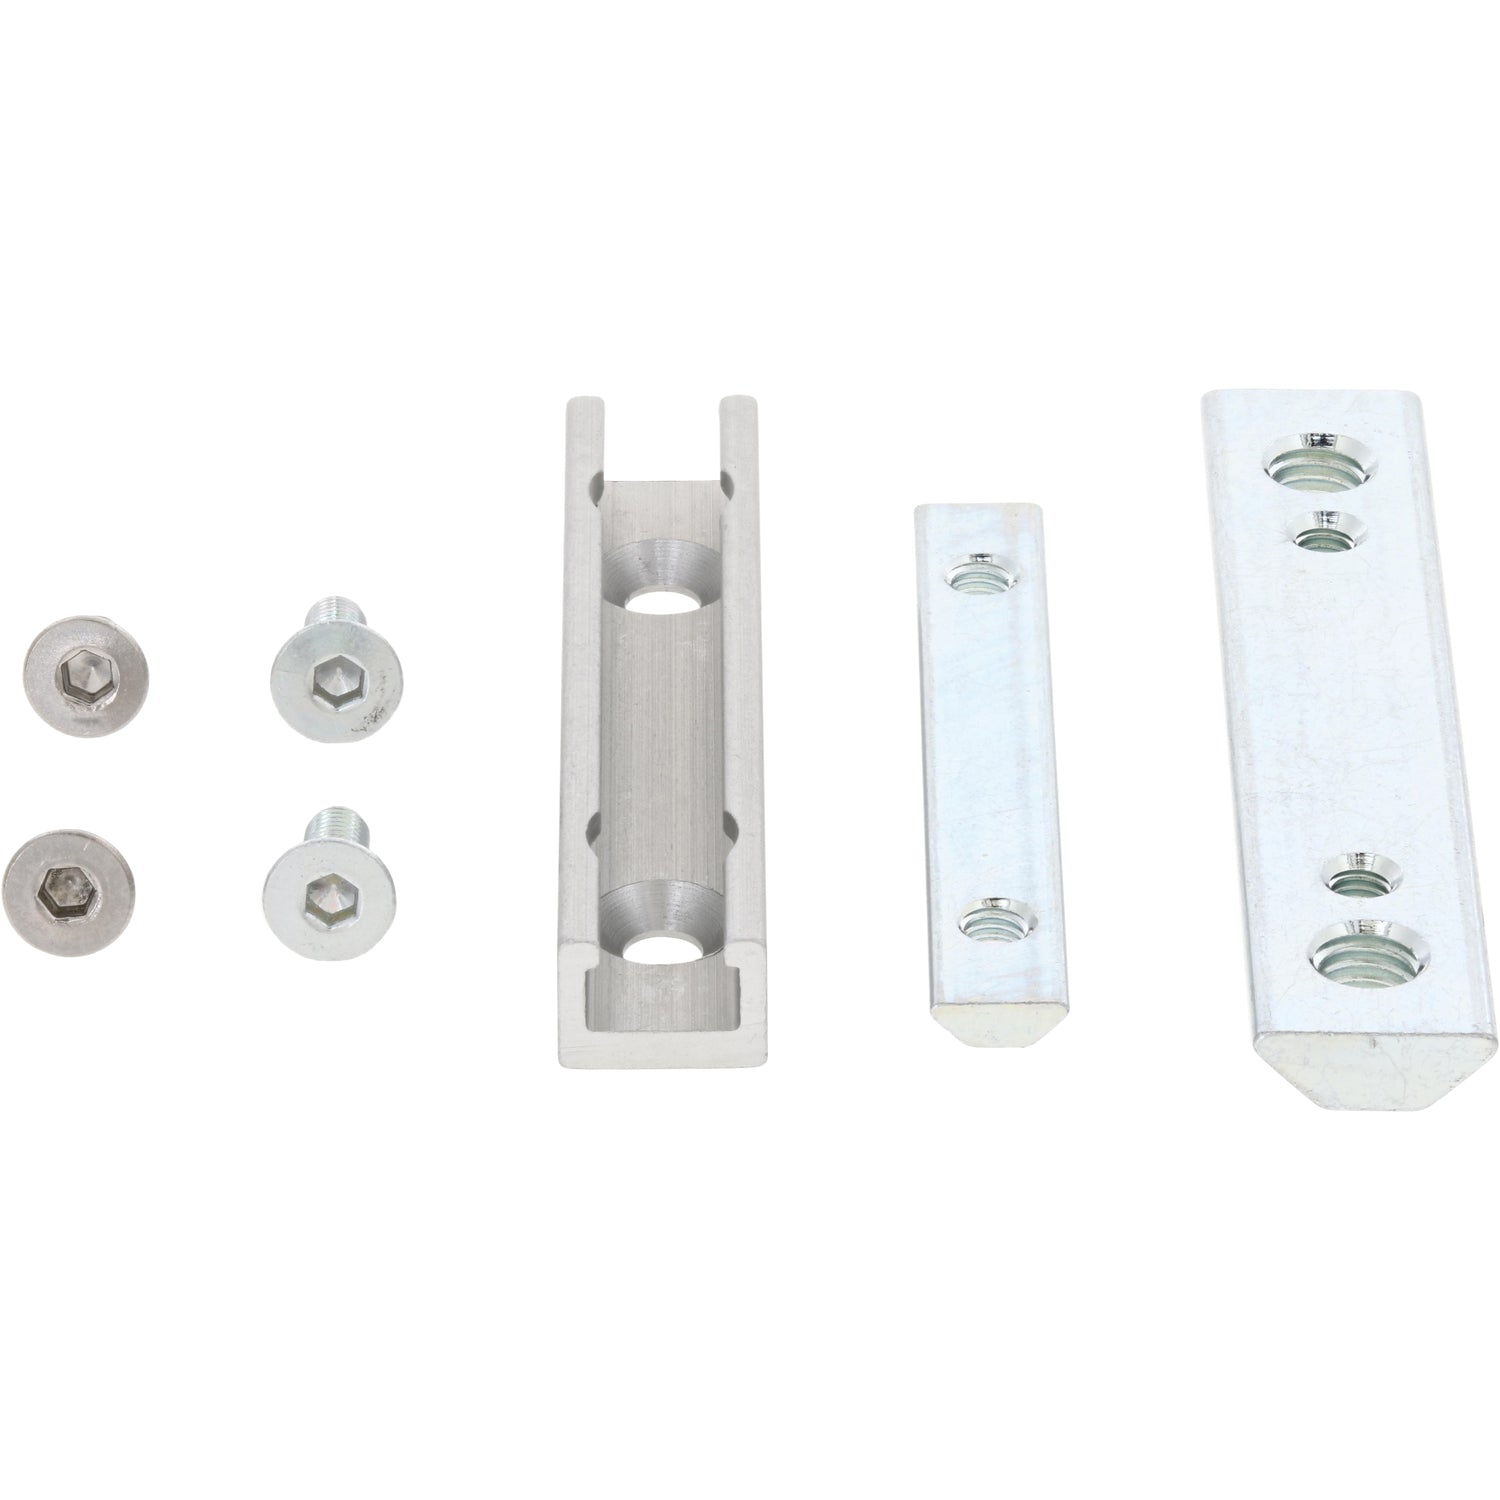 An aluminum slotted sensor bracket next to an assortment of fasteners. Parts shown on white background.